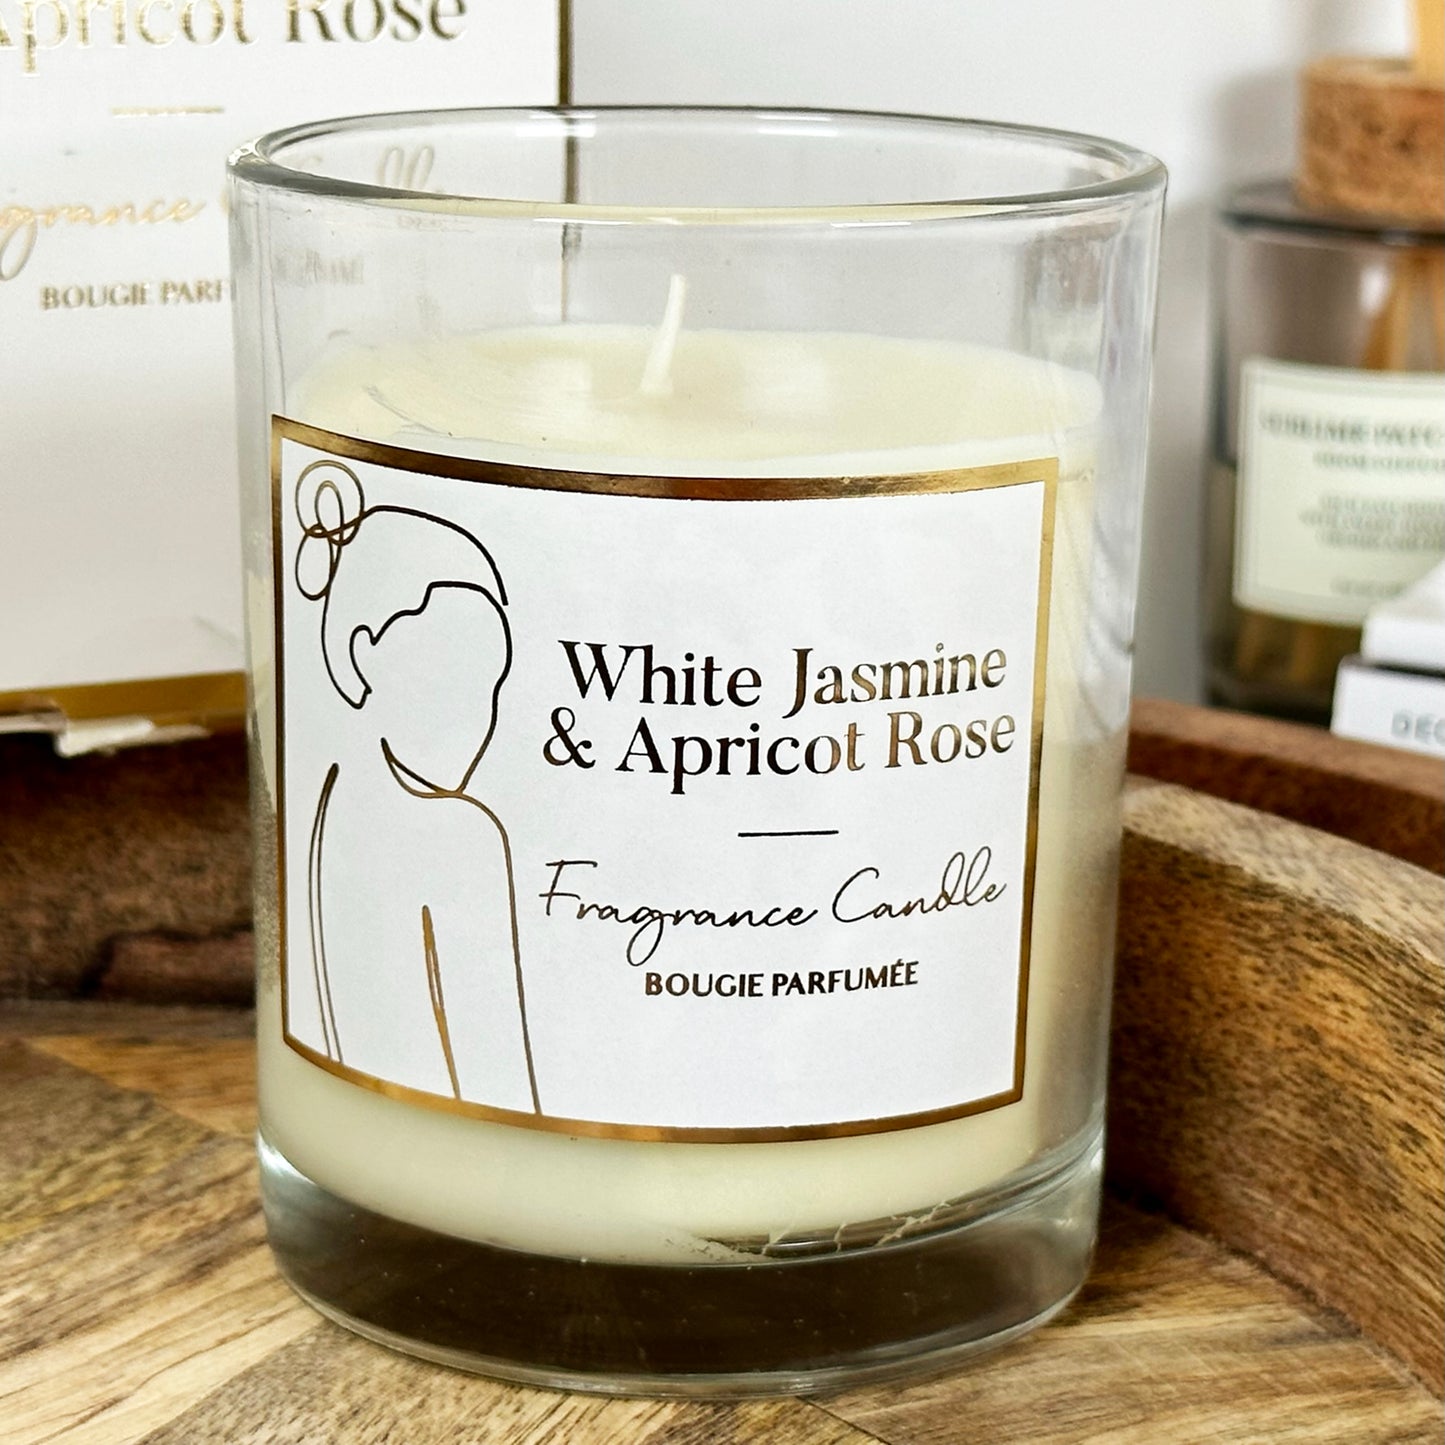 White Silhouette Lady Scented Candle Giftboxed